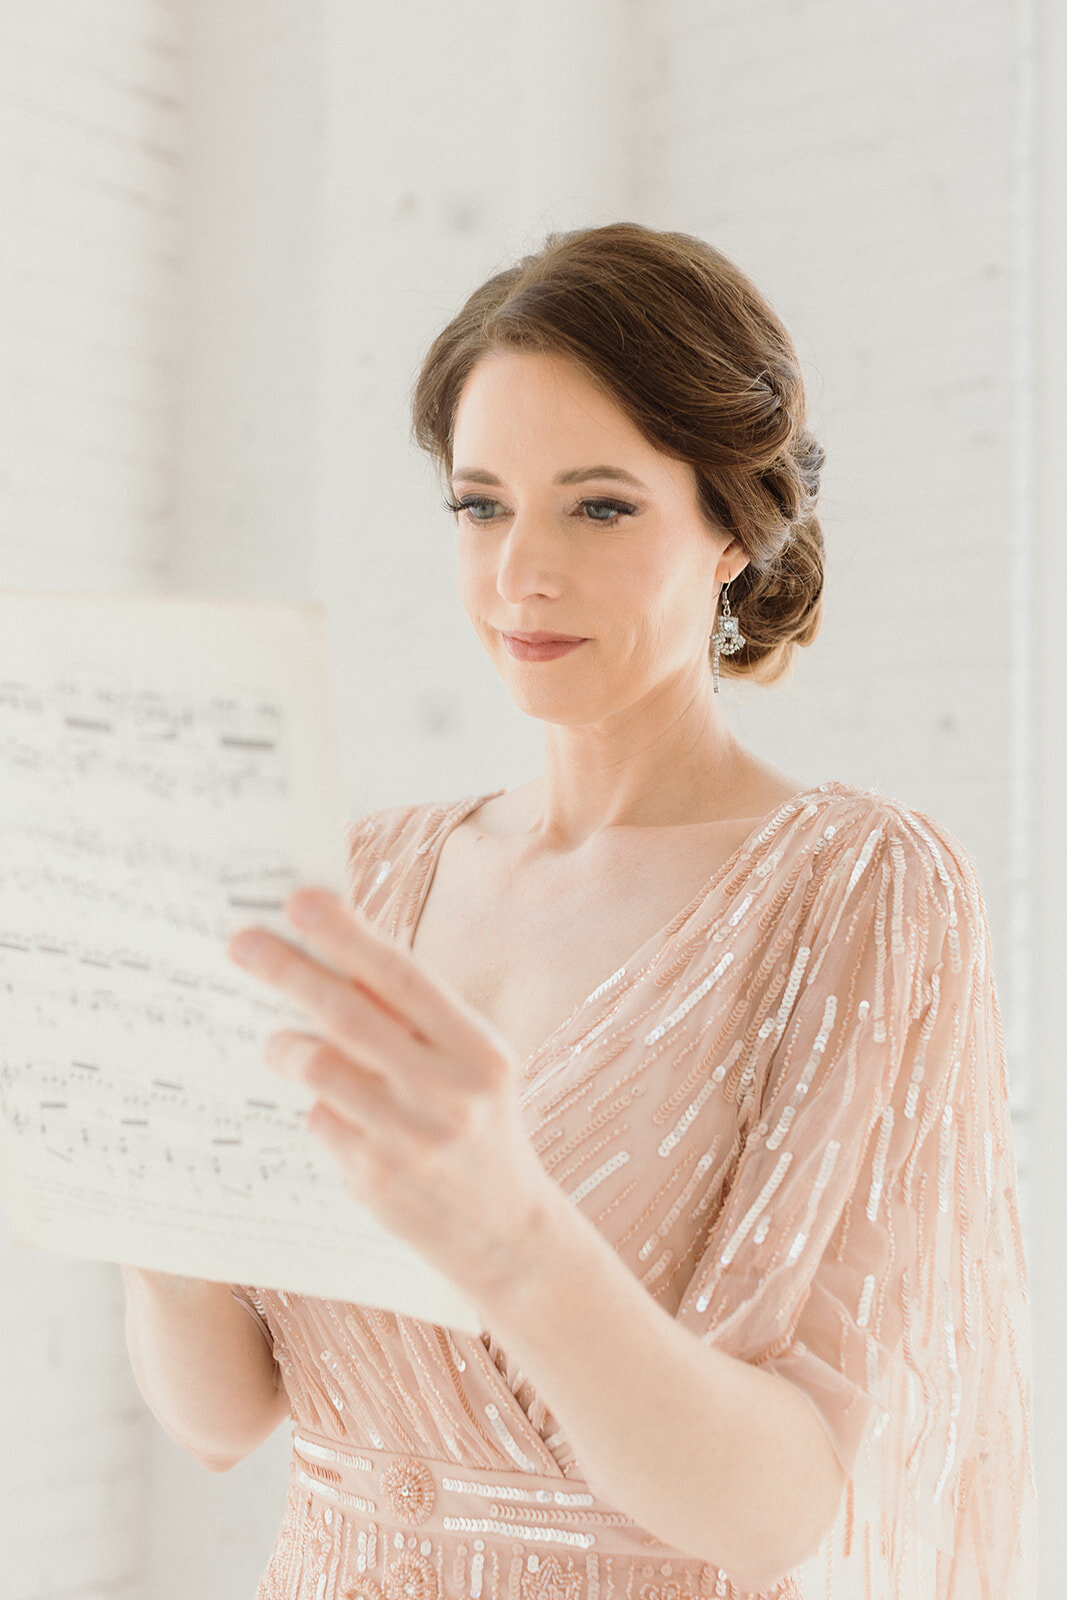 light skinned woman is light pink sparkly gown is reading music sheets. Photo is close up.